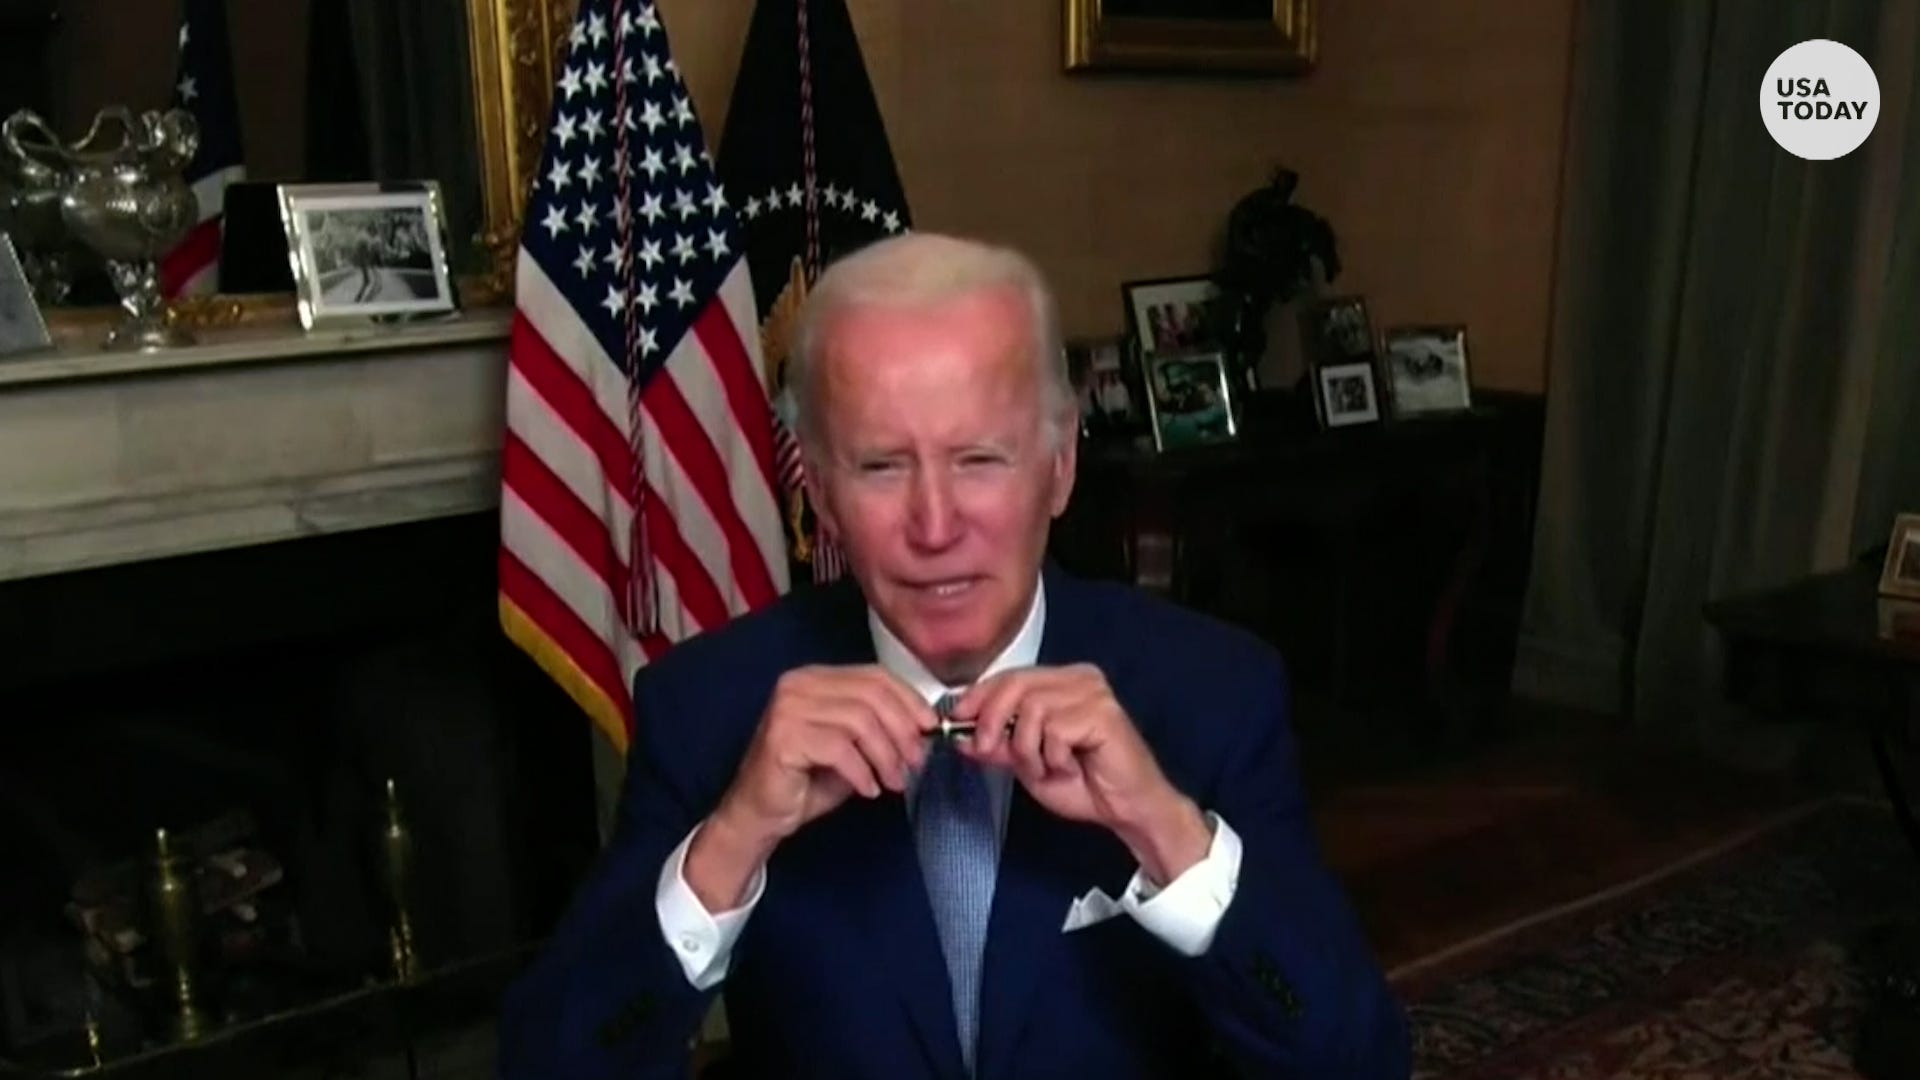 Biden says CHIPS Act will boost economy and bring manufacturing jobs back to US